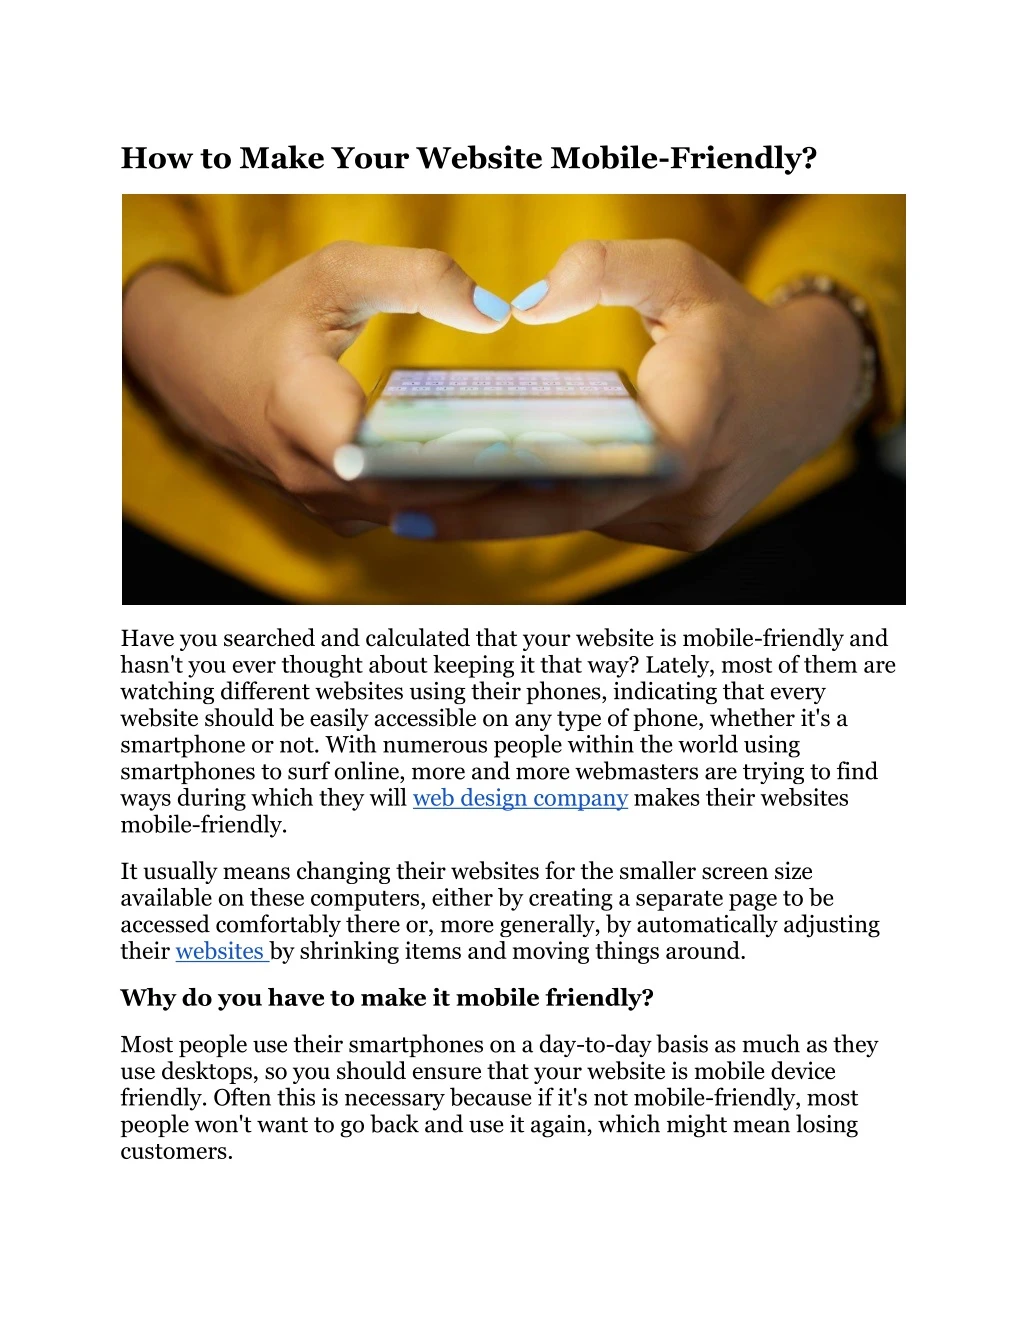 how to make your website mobile friendly